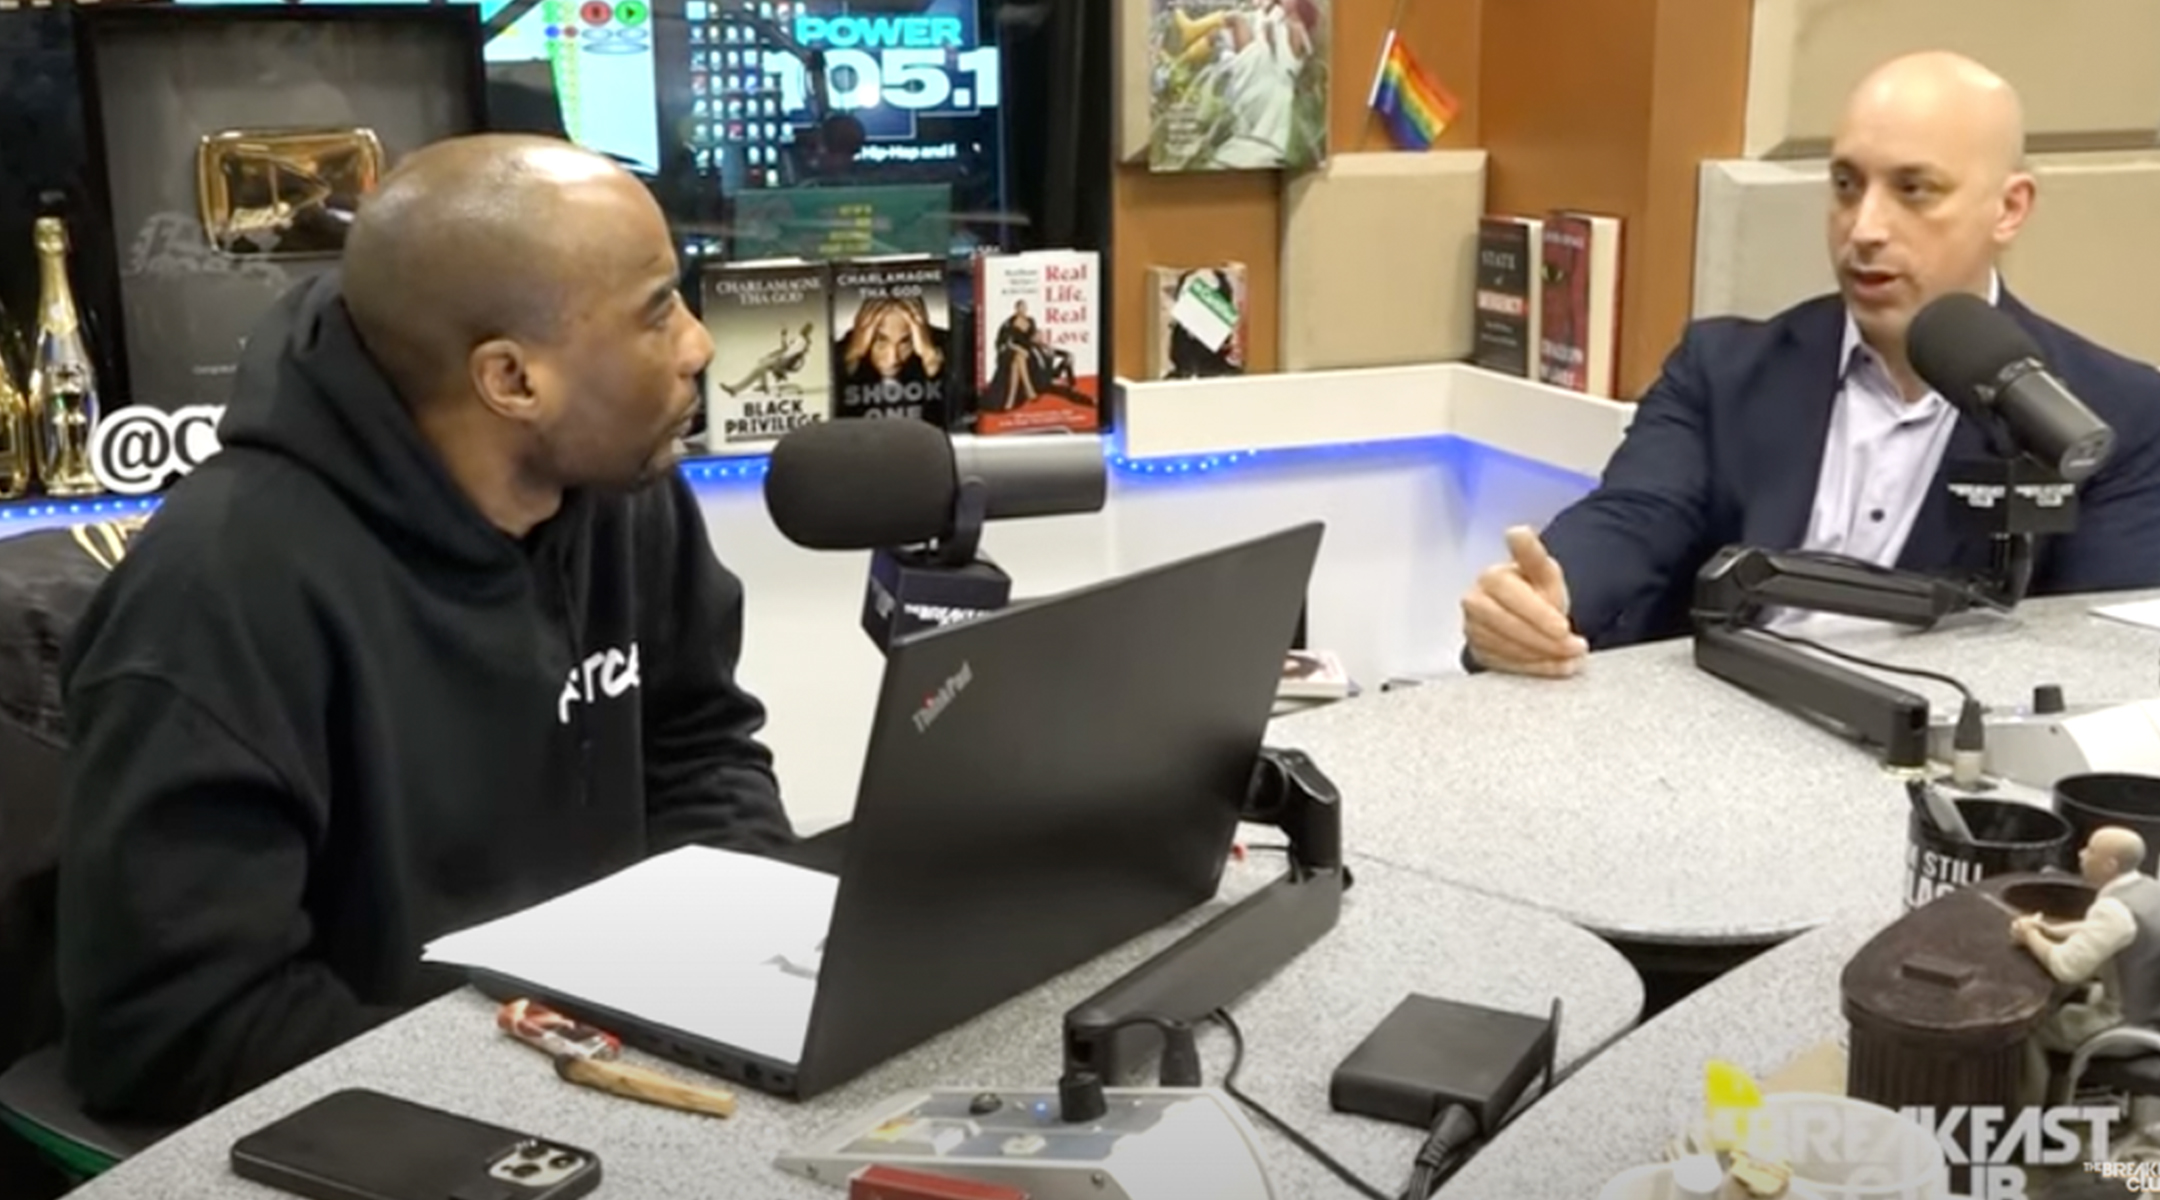 Anti Defamation League CEO Jonathan Greenblatt, right, made an appearance on The Breakfast Club, a radio show hosted by Charlamagne Tha God (left) and DJ Envy. (YouTube)